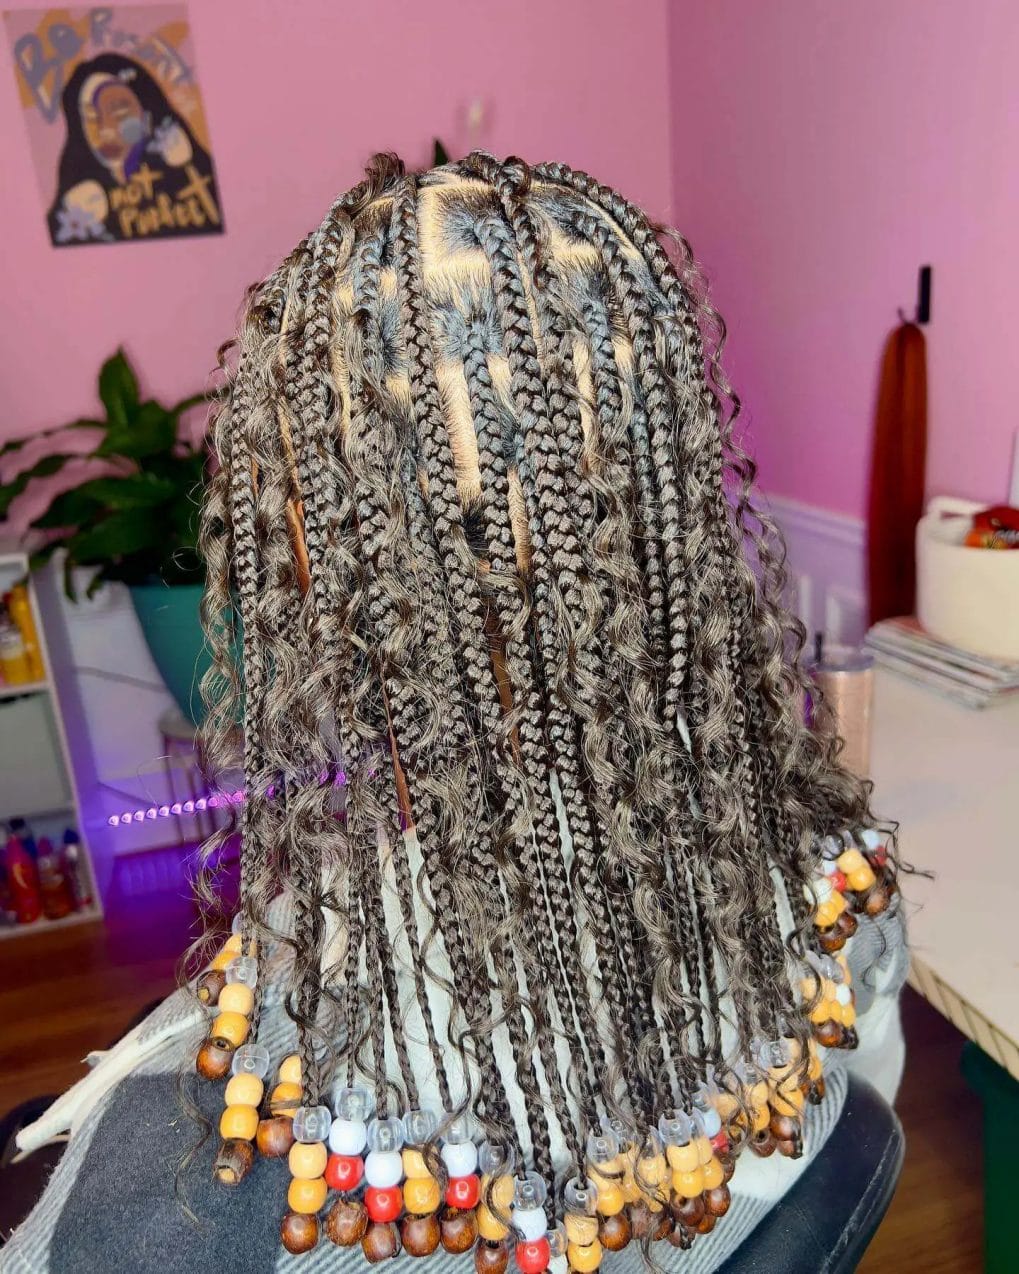 Cornrow braids with brown, caramel, and cream wooden beads transitioning to waves.